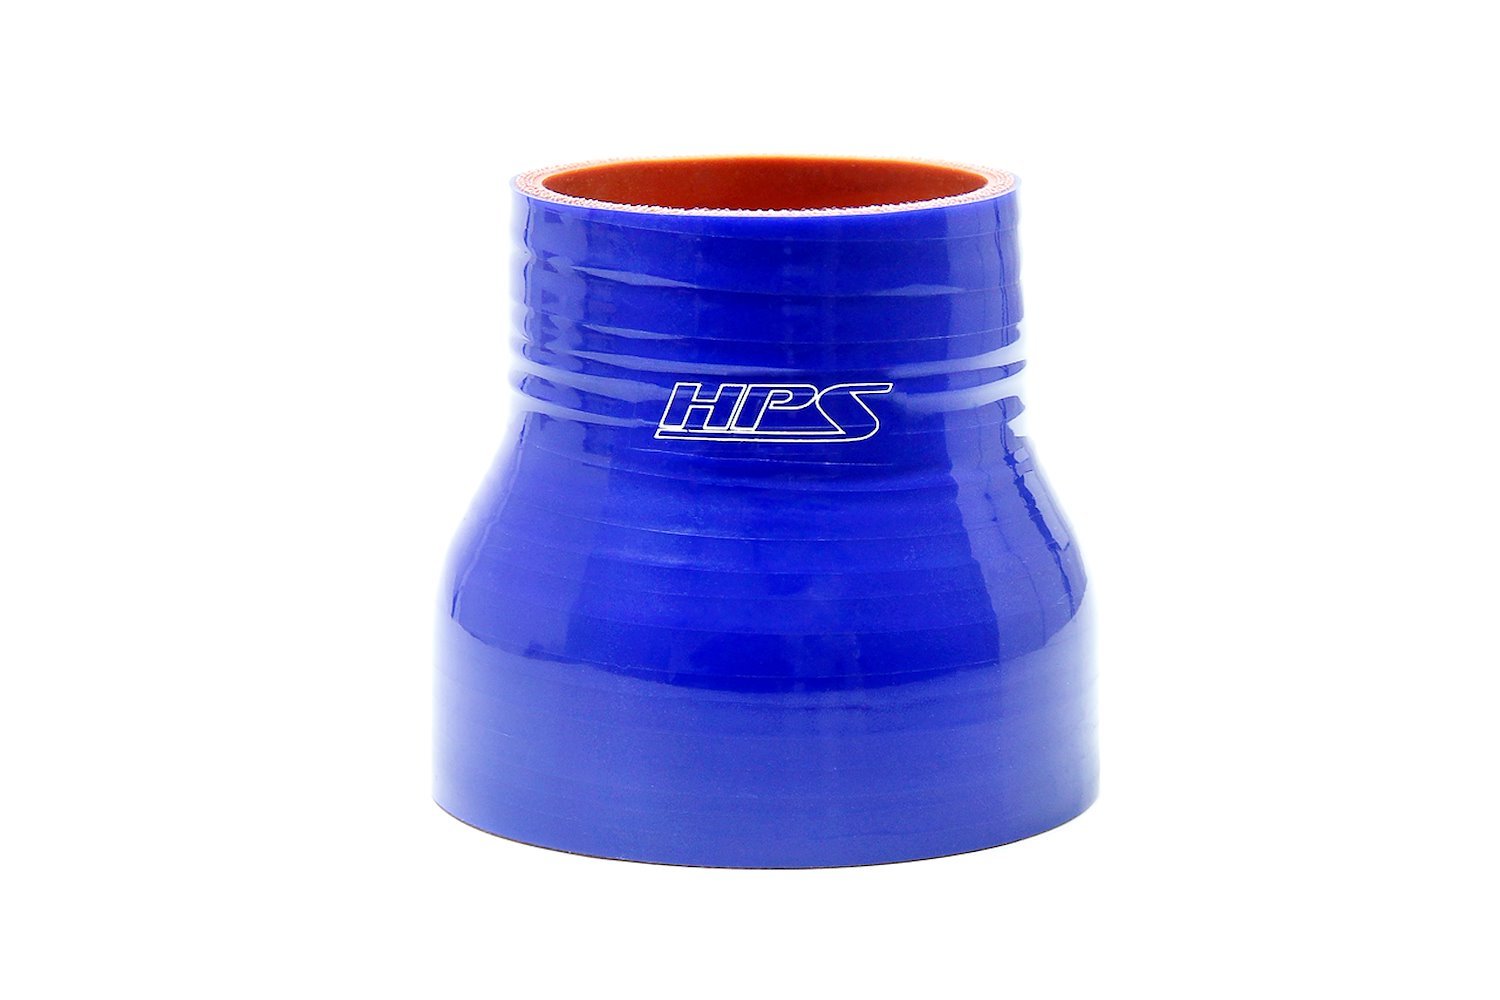 HTSR-225-325-BLUE Silicone Reducer Hose, High-Temp 4-Ply Reinforced, 2-1/4 in. - 3-1/4 in. ID, 3 in. Long, Blue